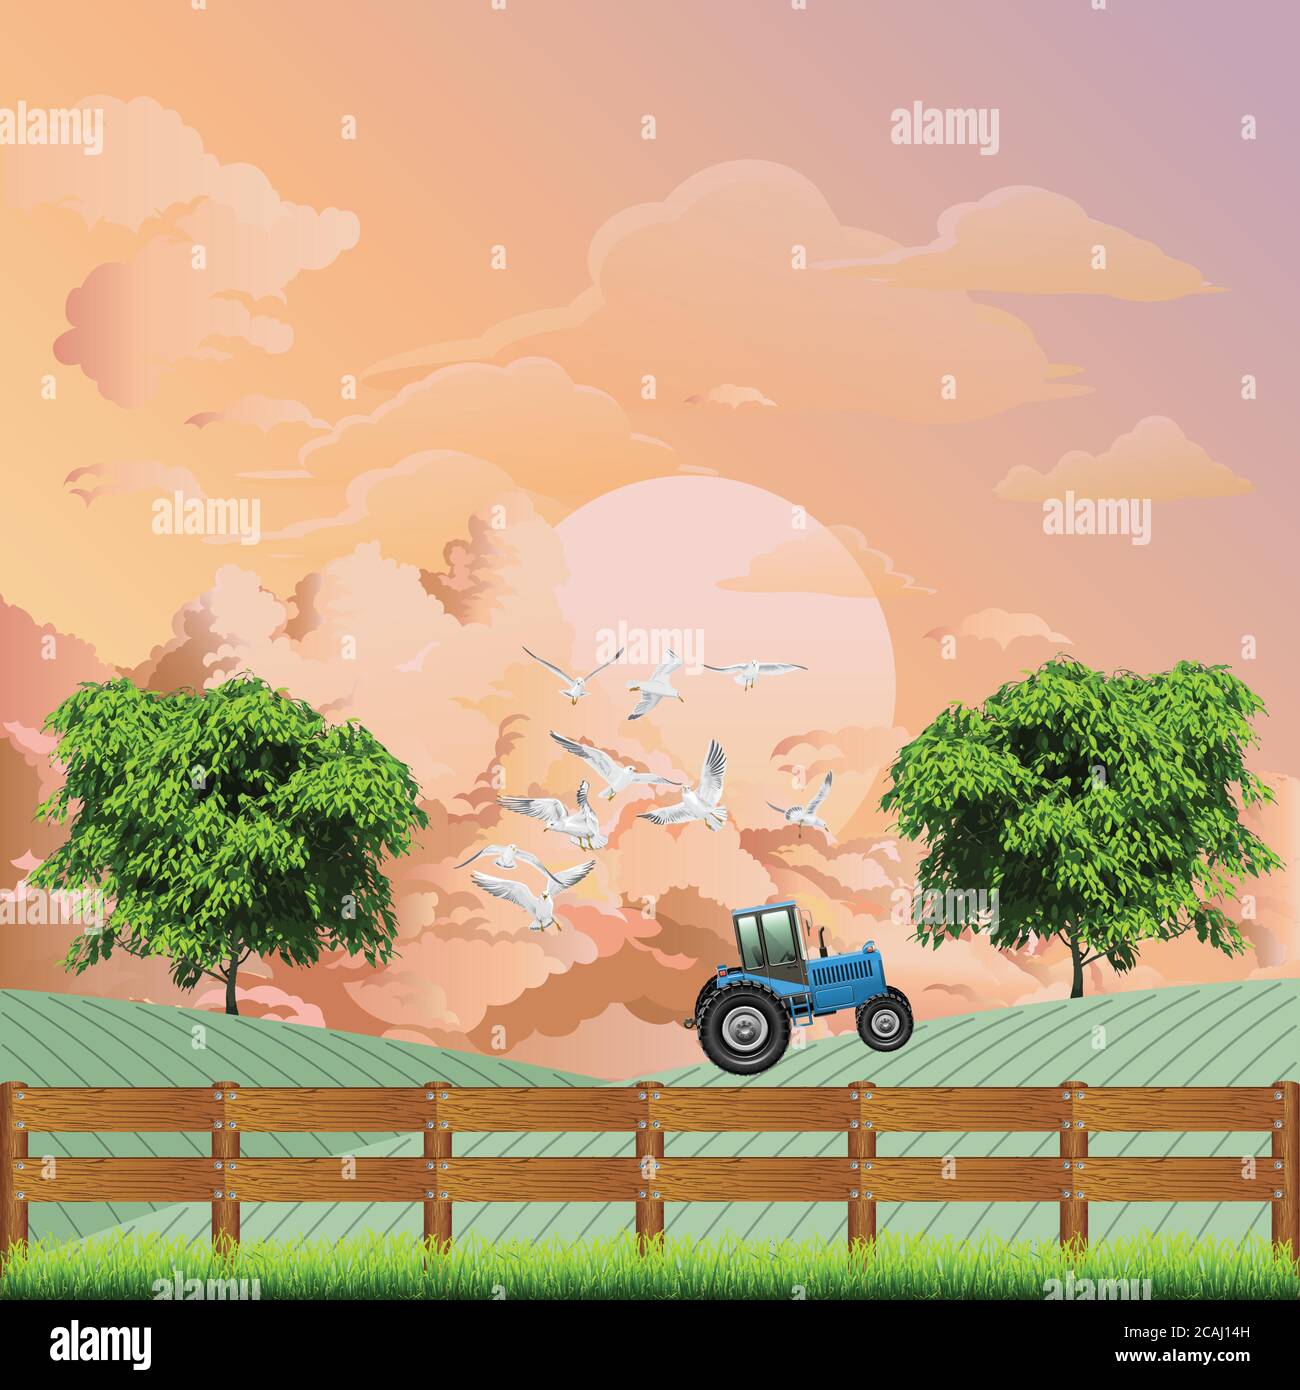 Picturesque rural scene with tractor working on a farm with seagulls flying close to the vehicle set against a dawn or dusk sky Stock Vector